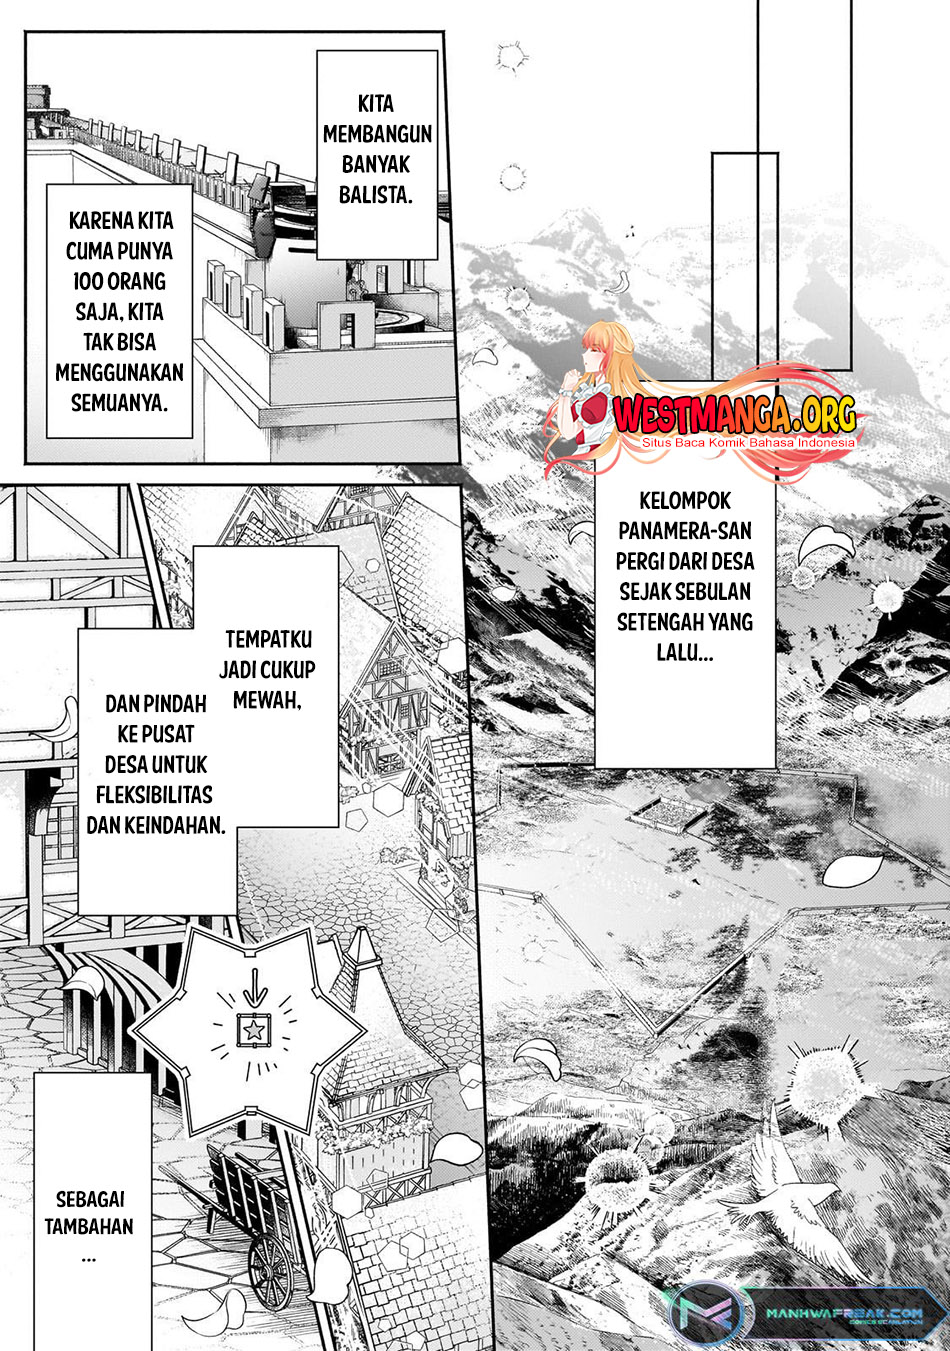 Fun Territory Defense Of The Easy-going Lord ~the Nameless Village Is Made Into The Strongest Fortified City By Production Magic~ Chapter 24.2